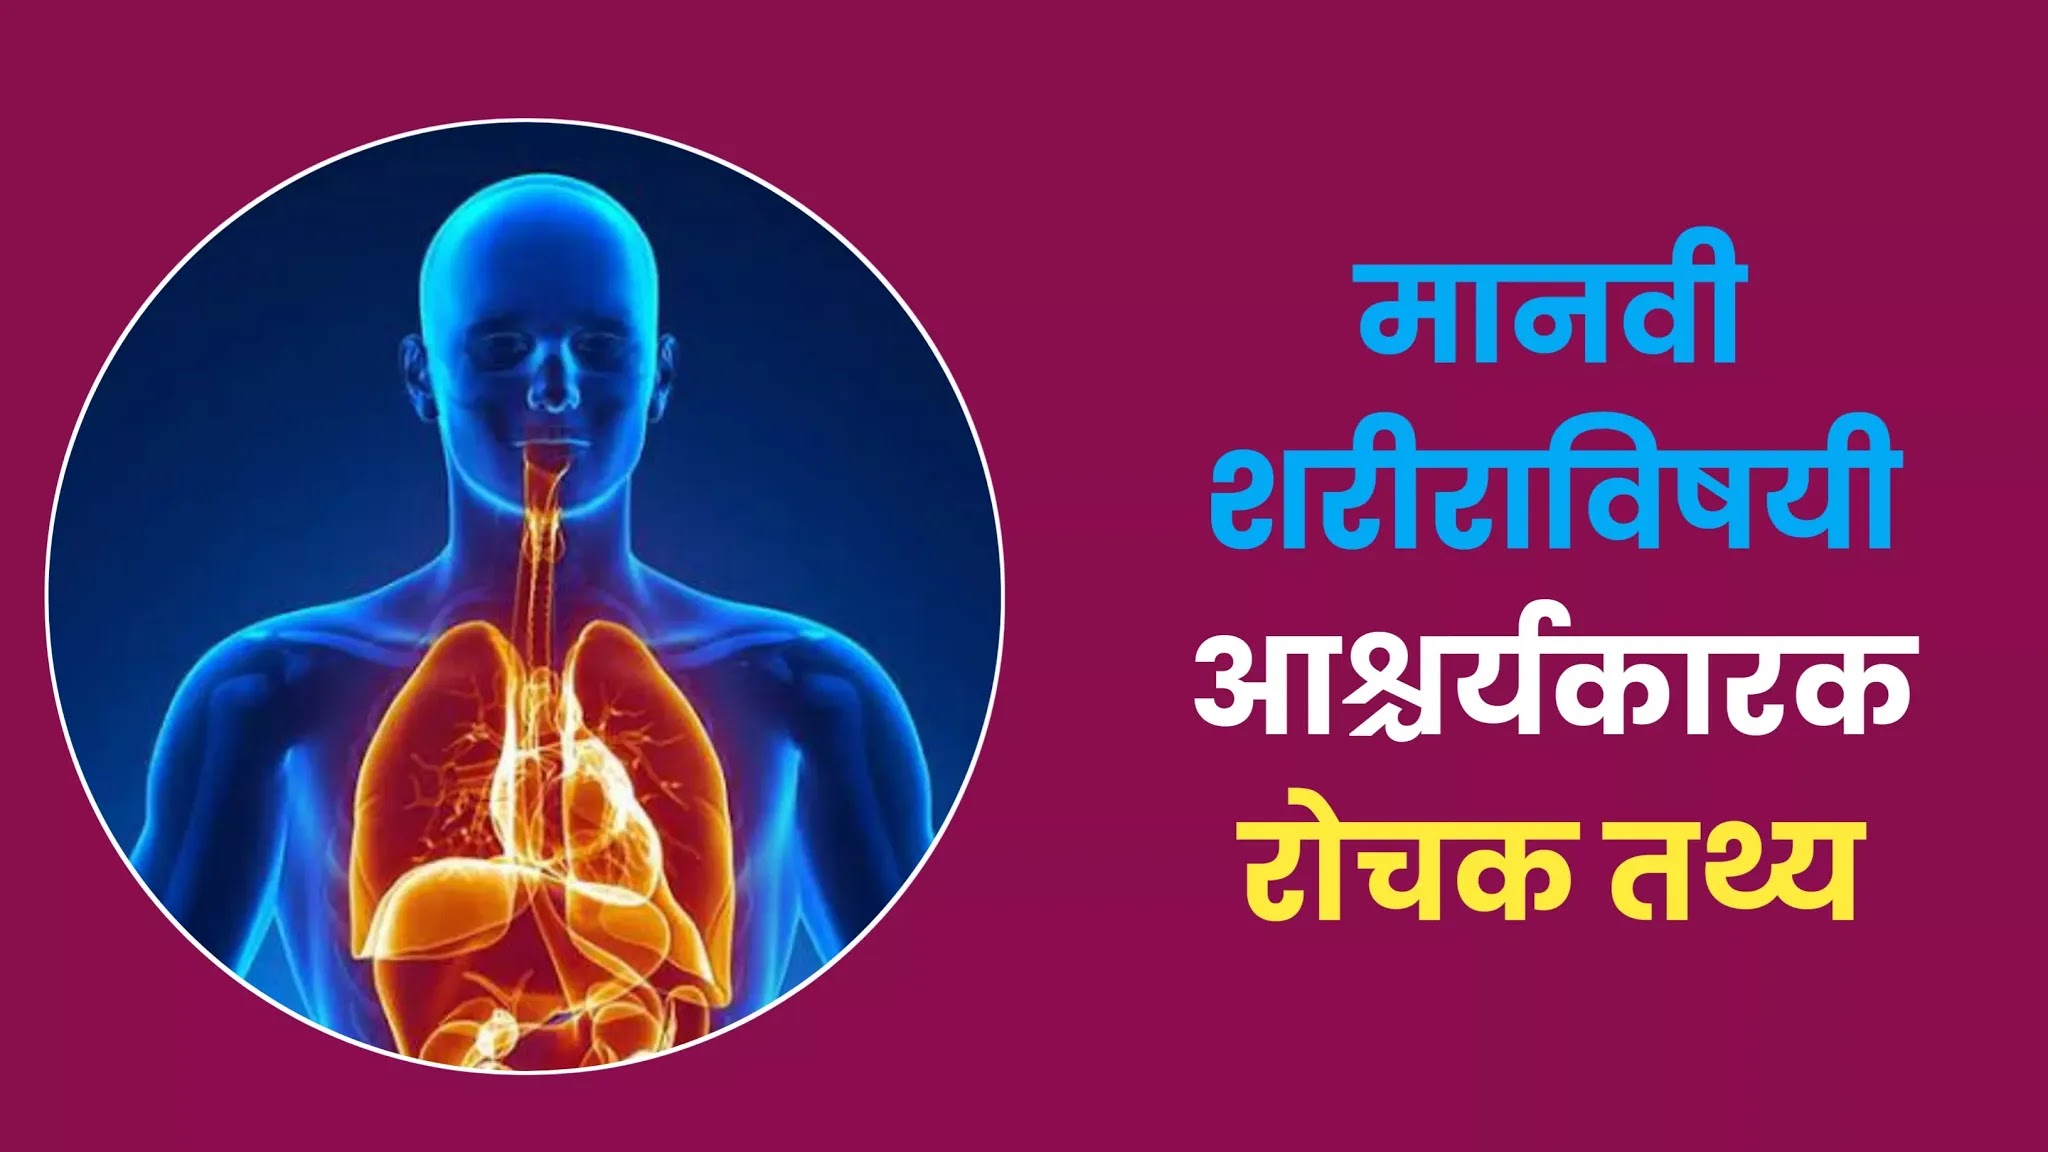 Intresting facts about human body in Marathi